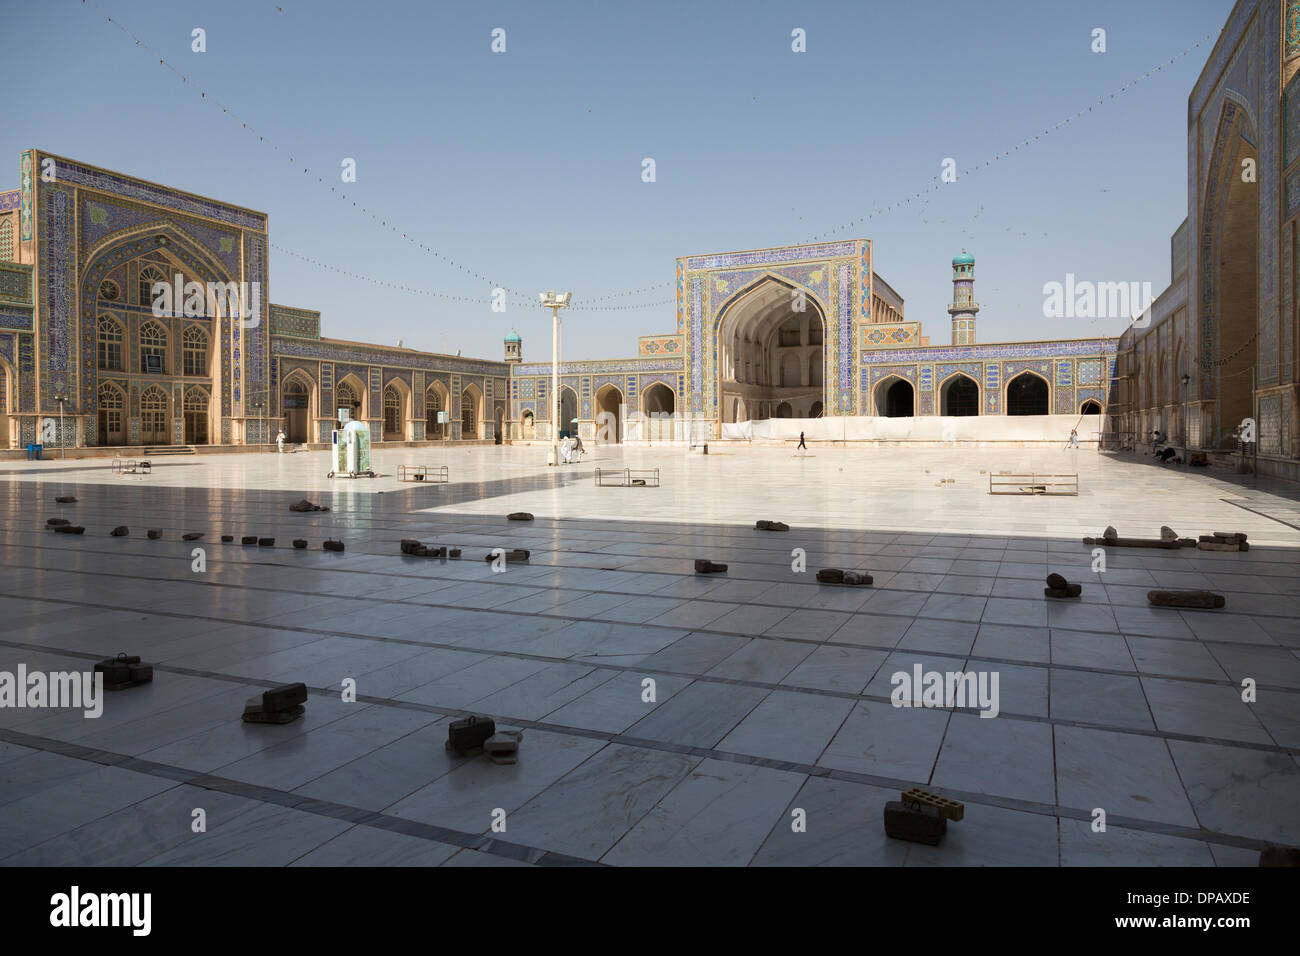 courtyard of Friday Mosque, Herat, Afghanistan Stock Photo